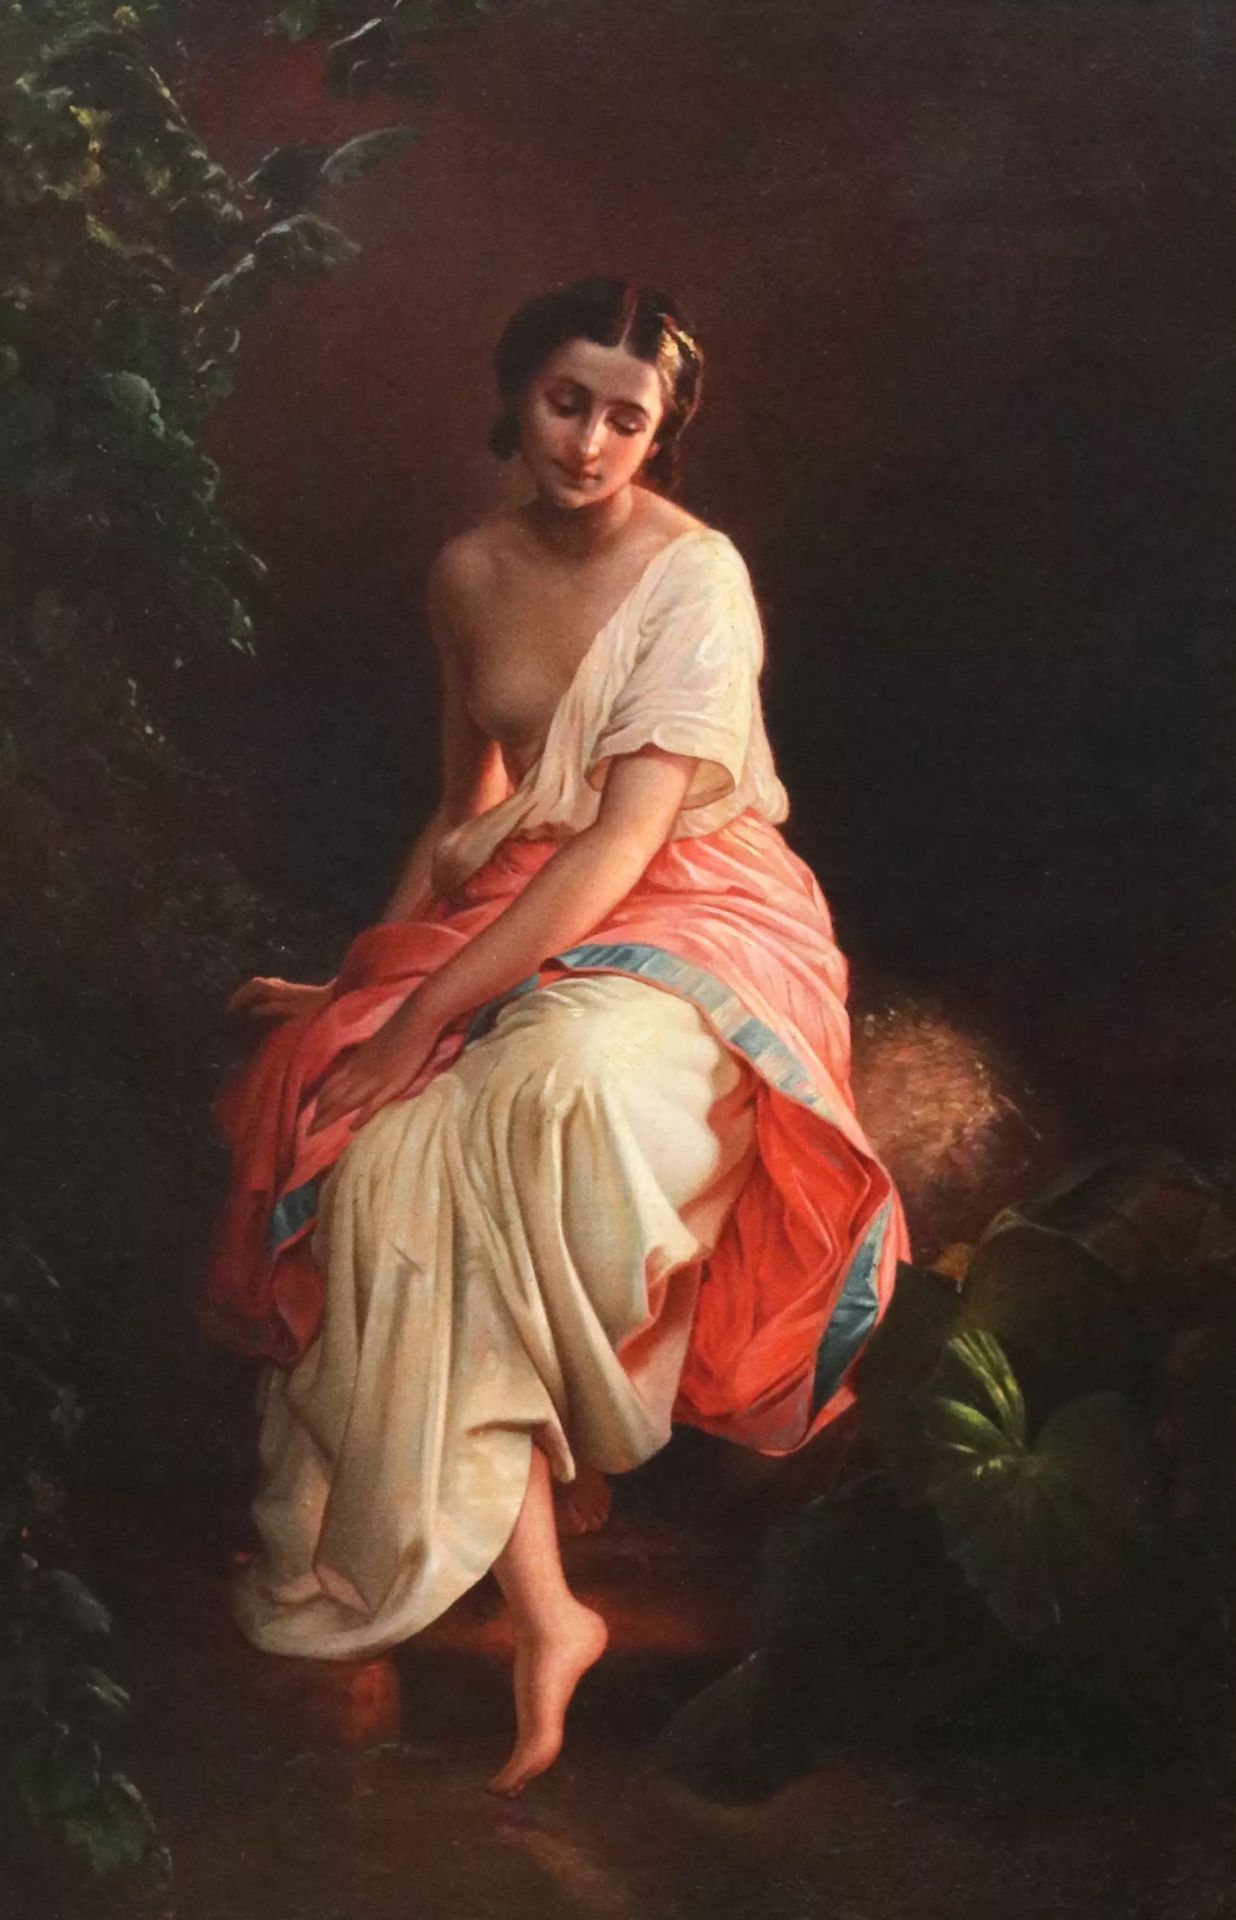 Painting. Romantic image of a naiad bather. Russian school of the middle of the 19th century. - Image 2 of 4